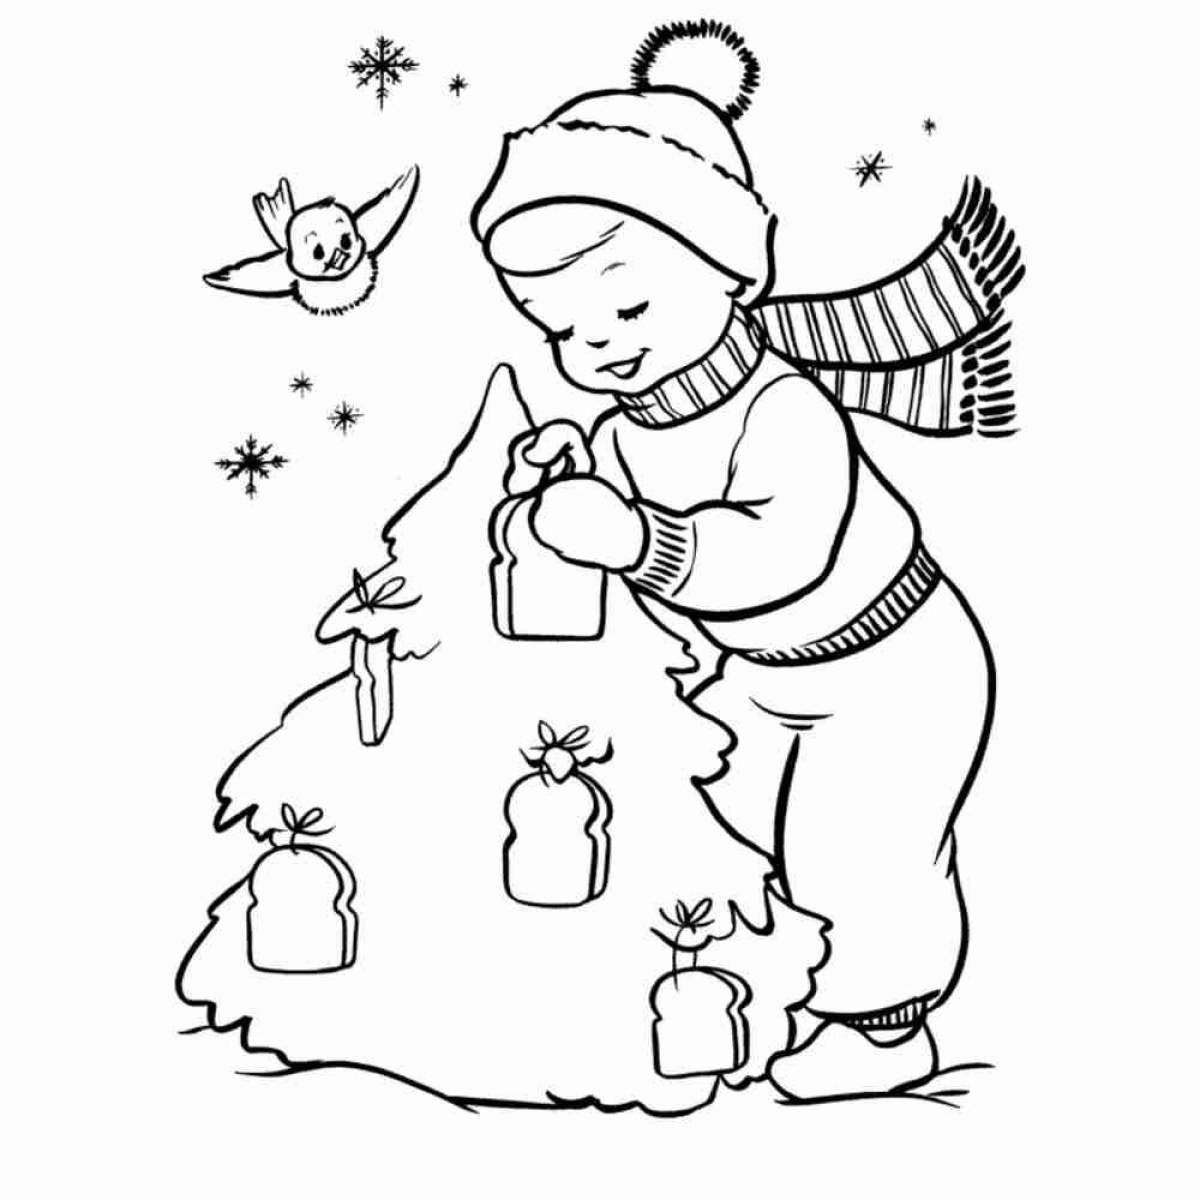 Merry Christmas coloring book for boys